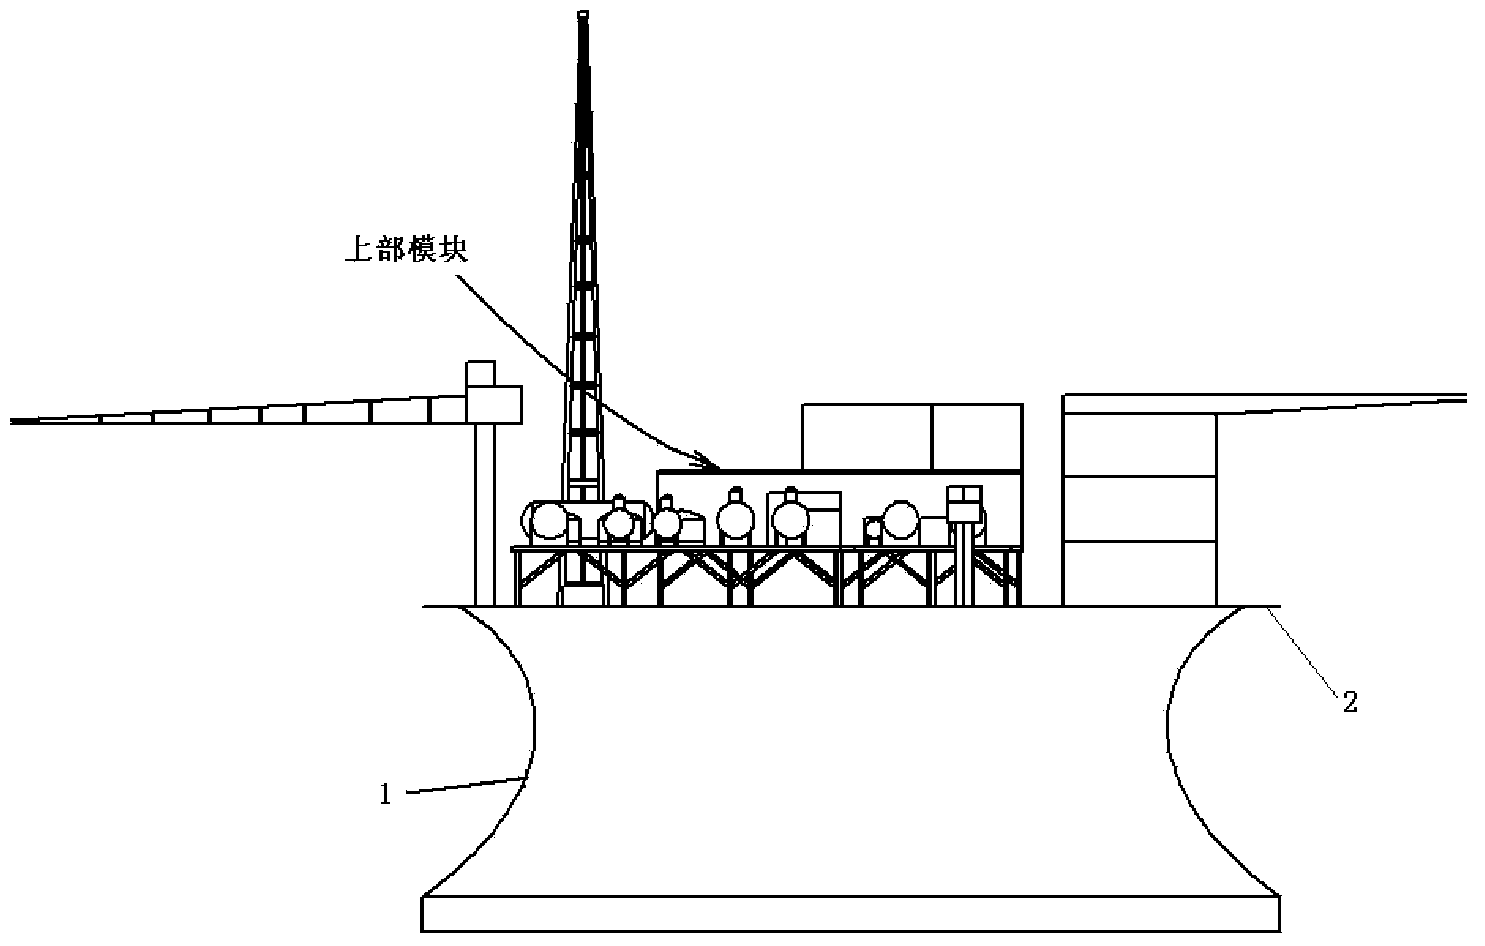 Double-curved-surface floating type production oil storage platform